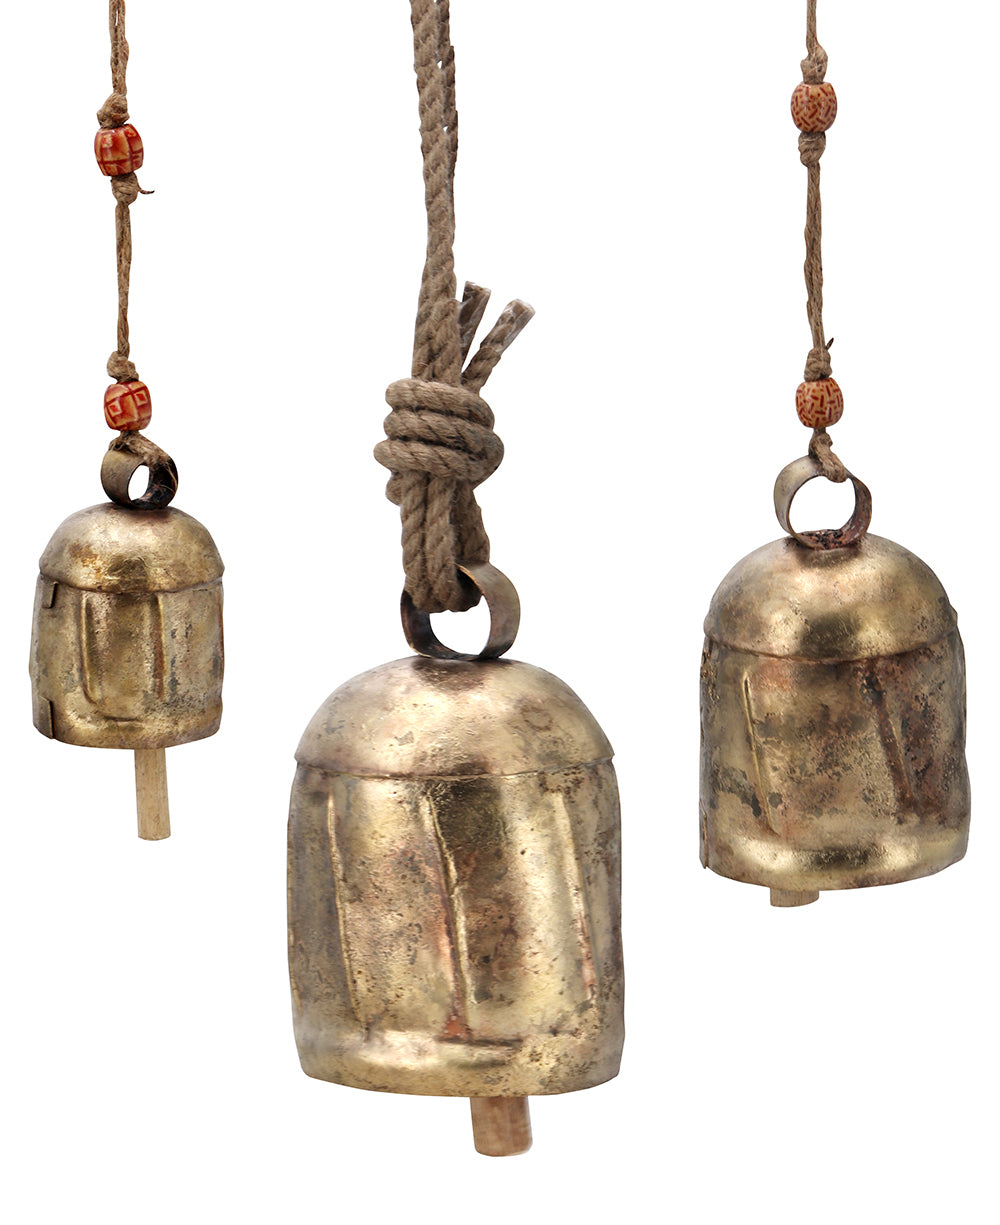 Wind Chimes and Bells – Cultural Elements